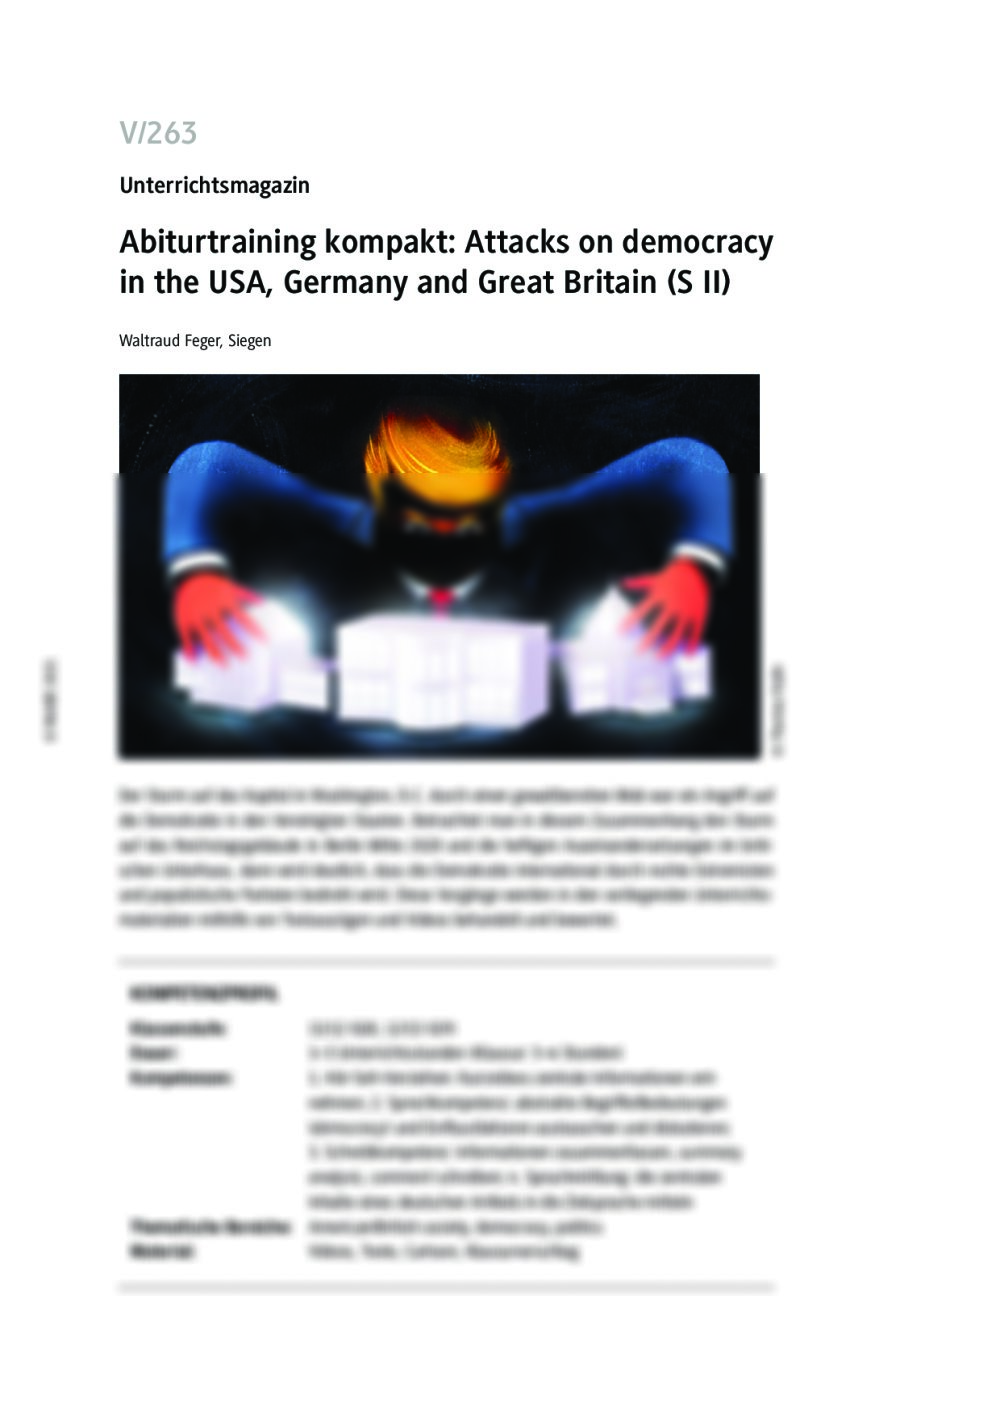 Abiturtraining kompakt: Attacks on democracy in the USA, Germany and Great Britain - Seite 1